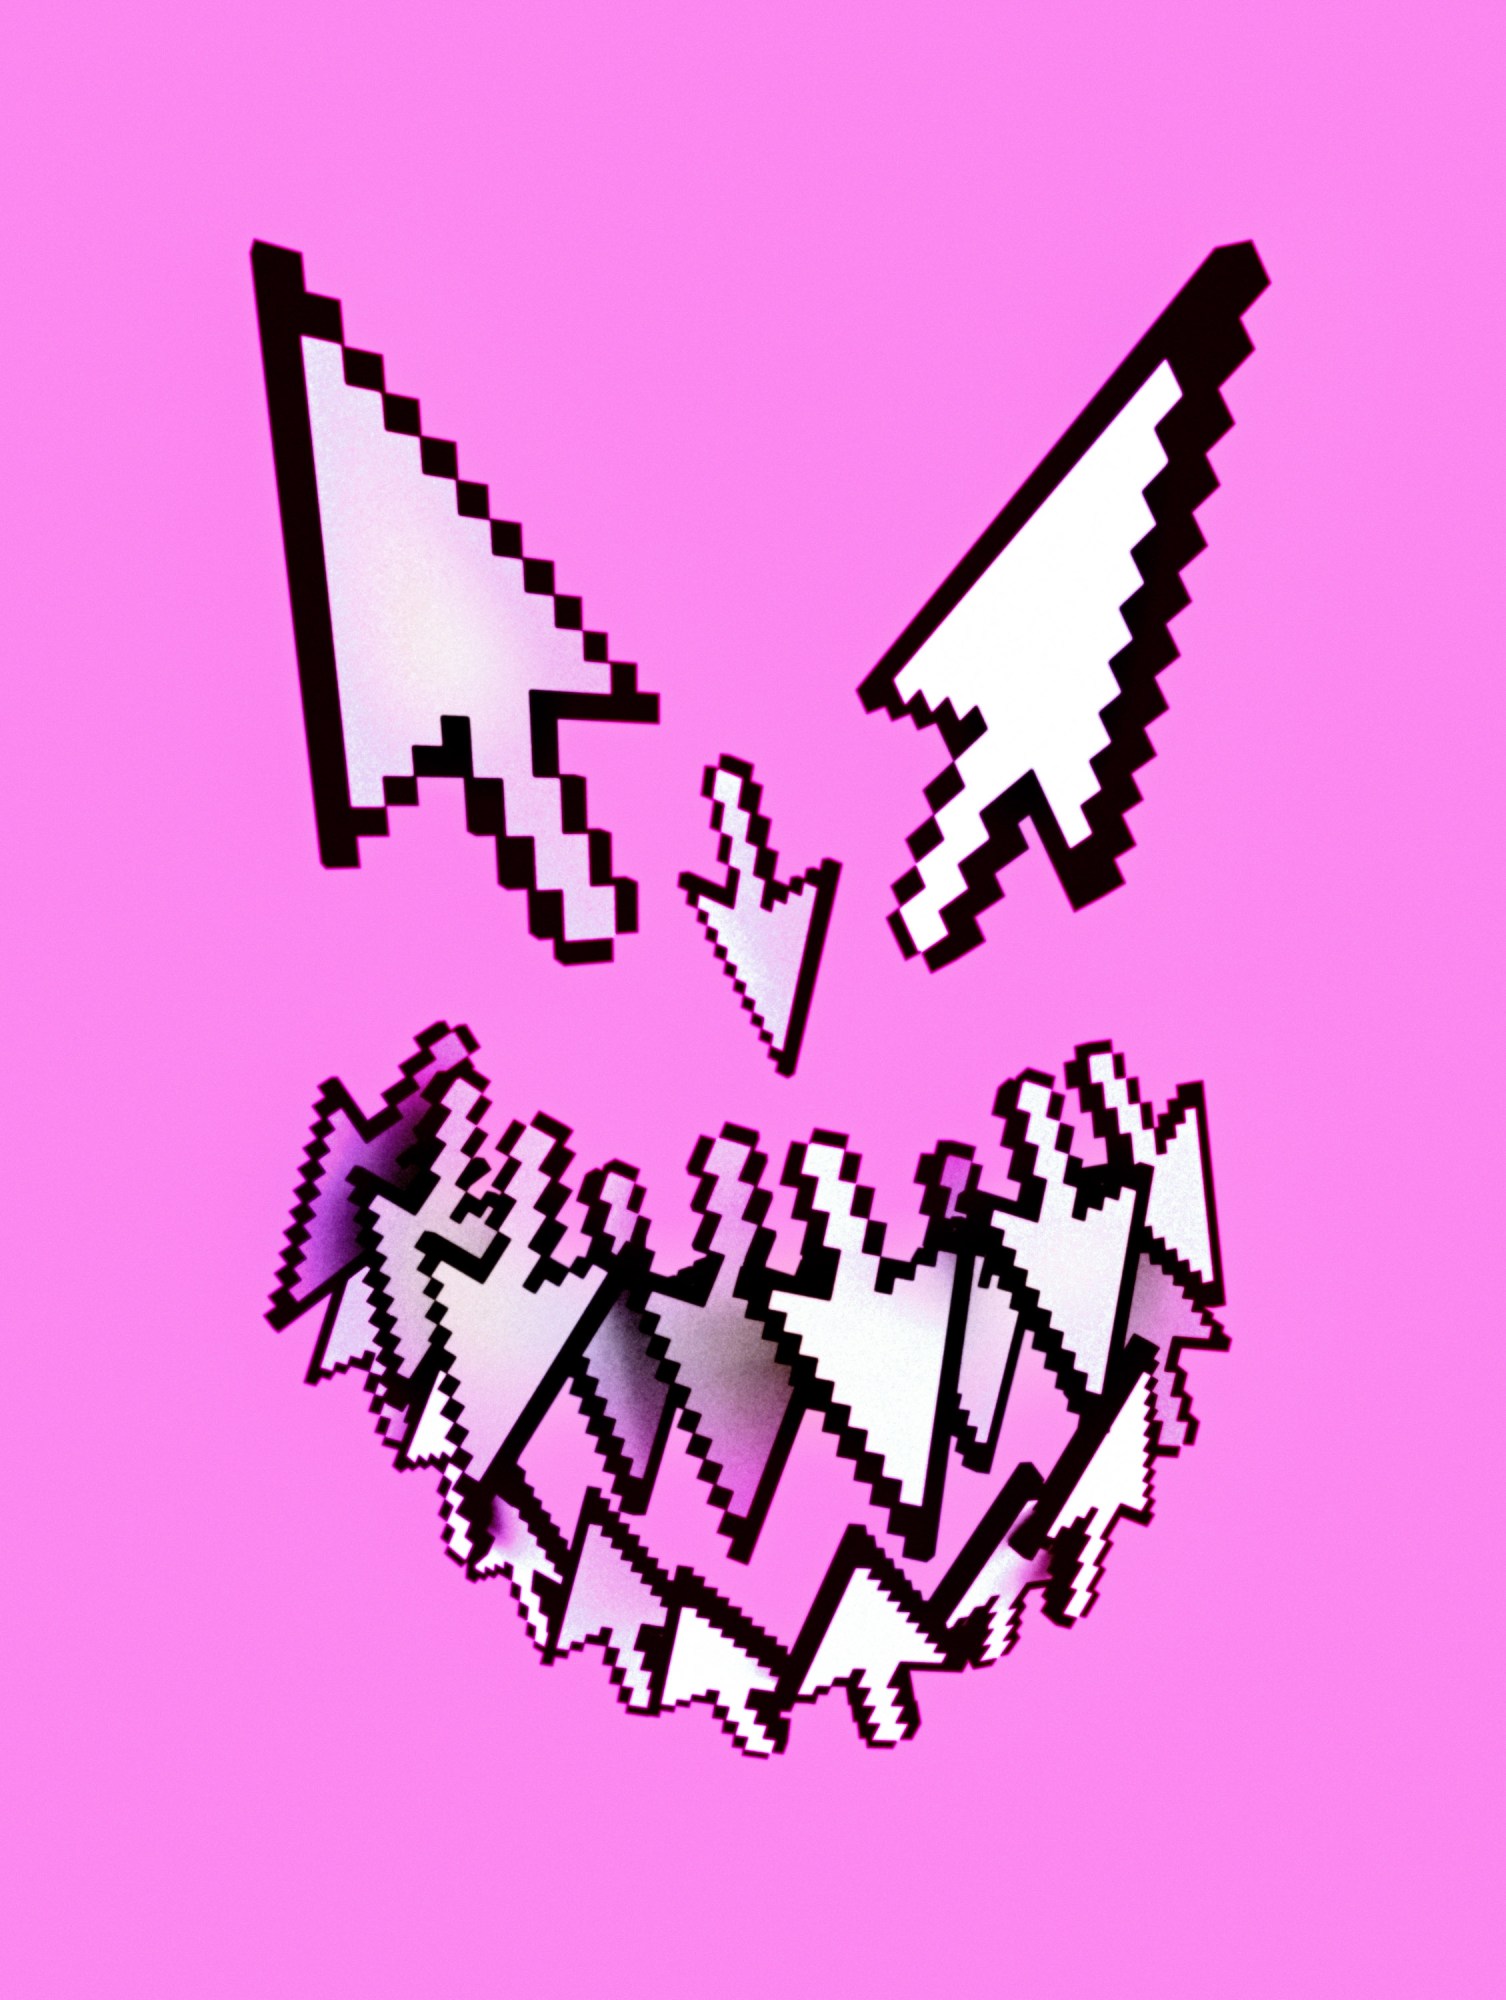 sinister-looking face made of white cursor arrows